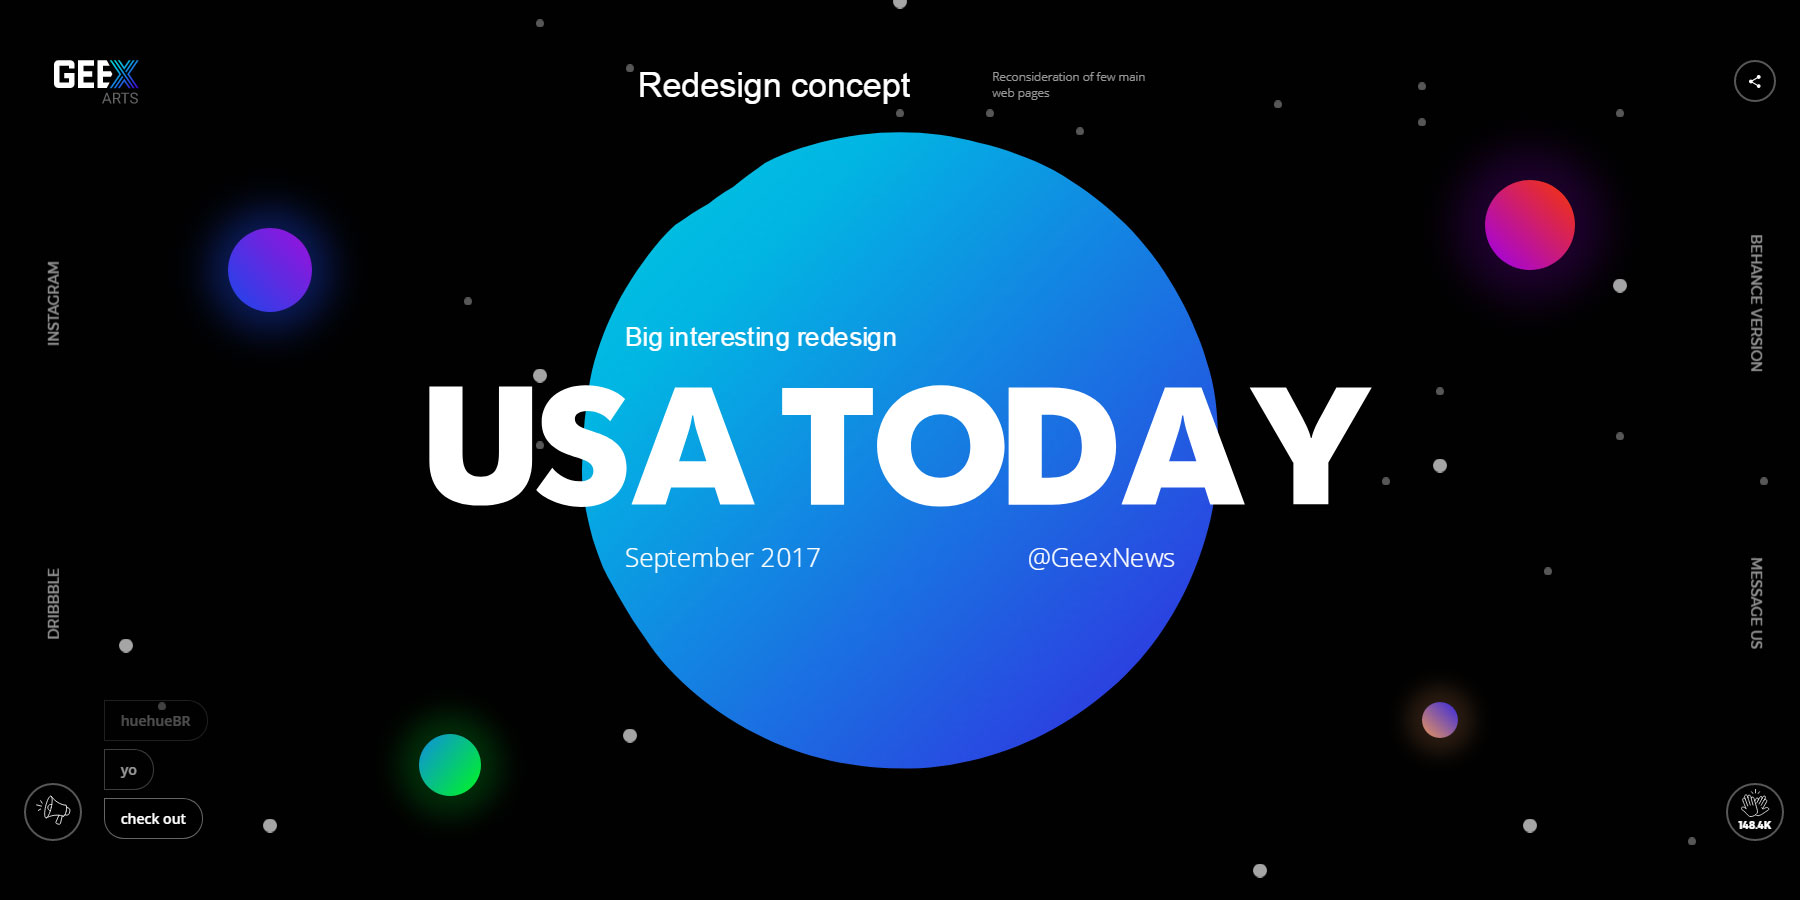 USA TODAY - Website of the Day